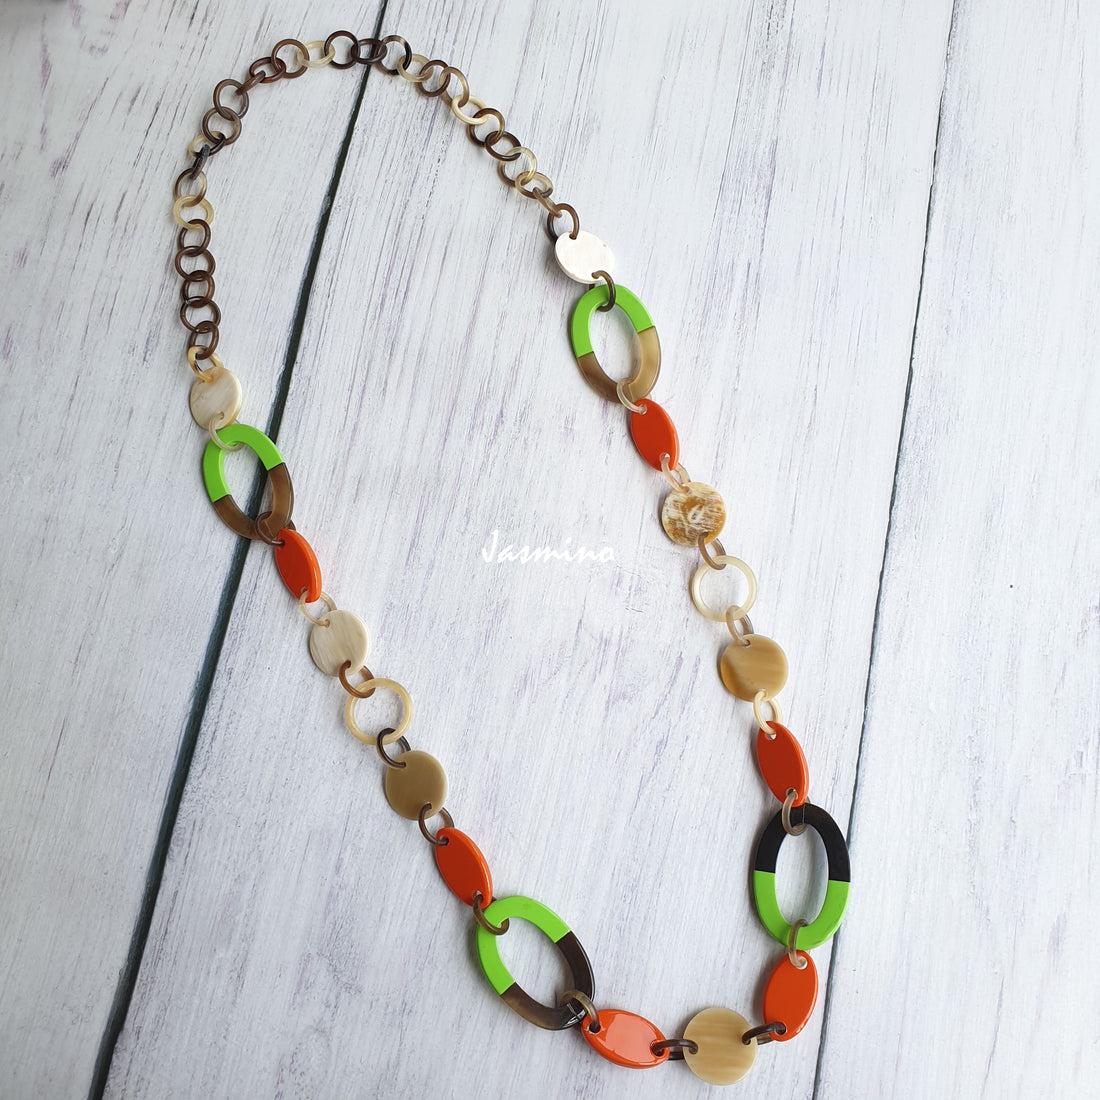 Jasmino unique handmade Vintage chain link necklace jewelry features brown, lime green, orange, and white in natural buffalo horn for women